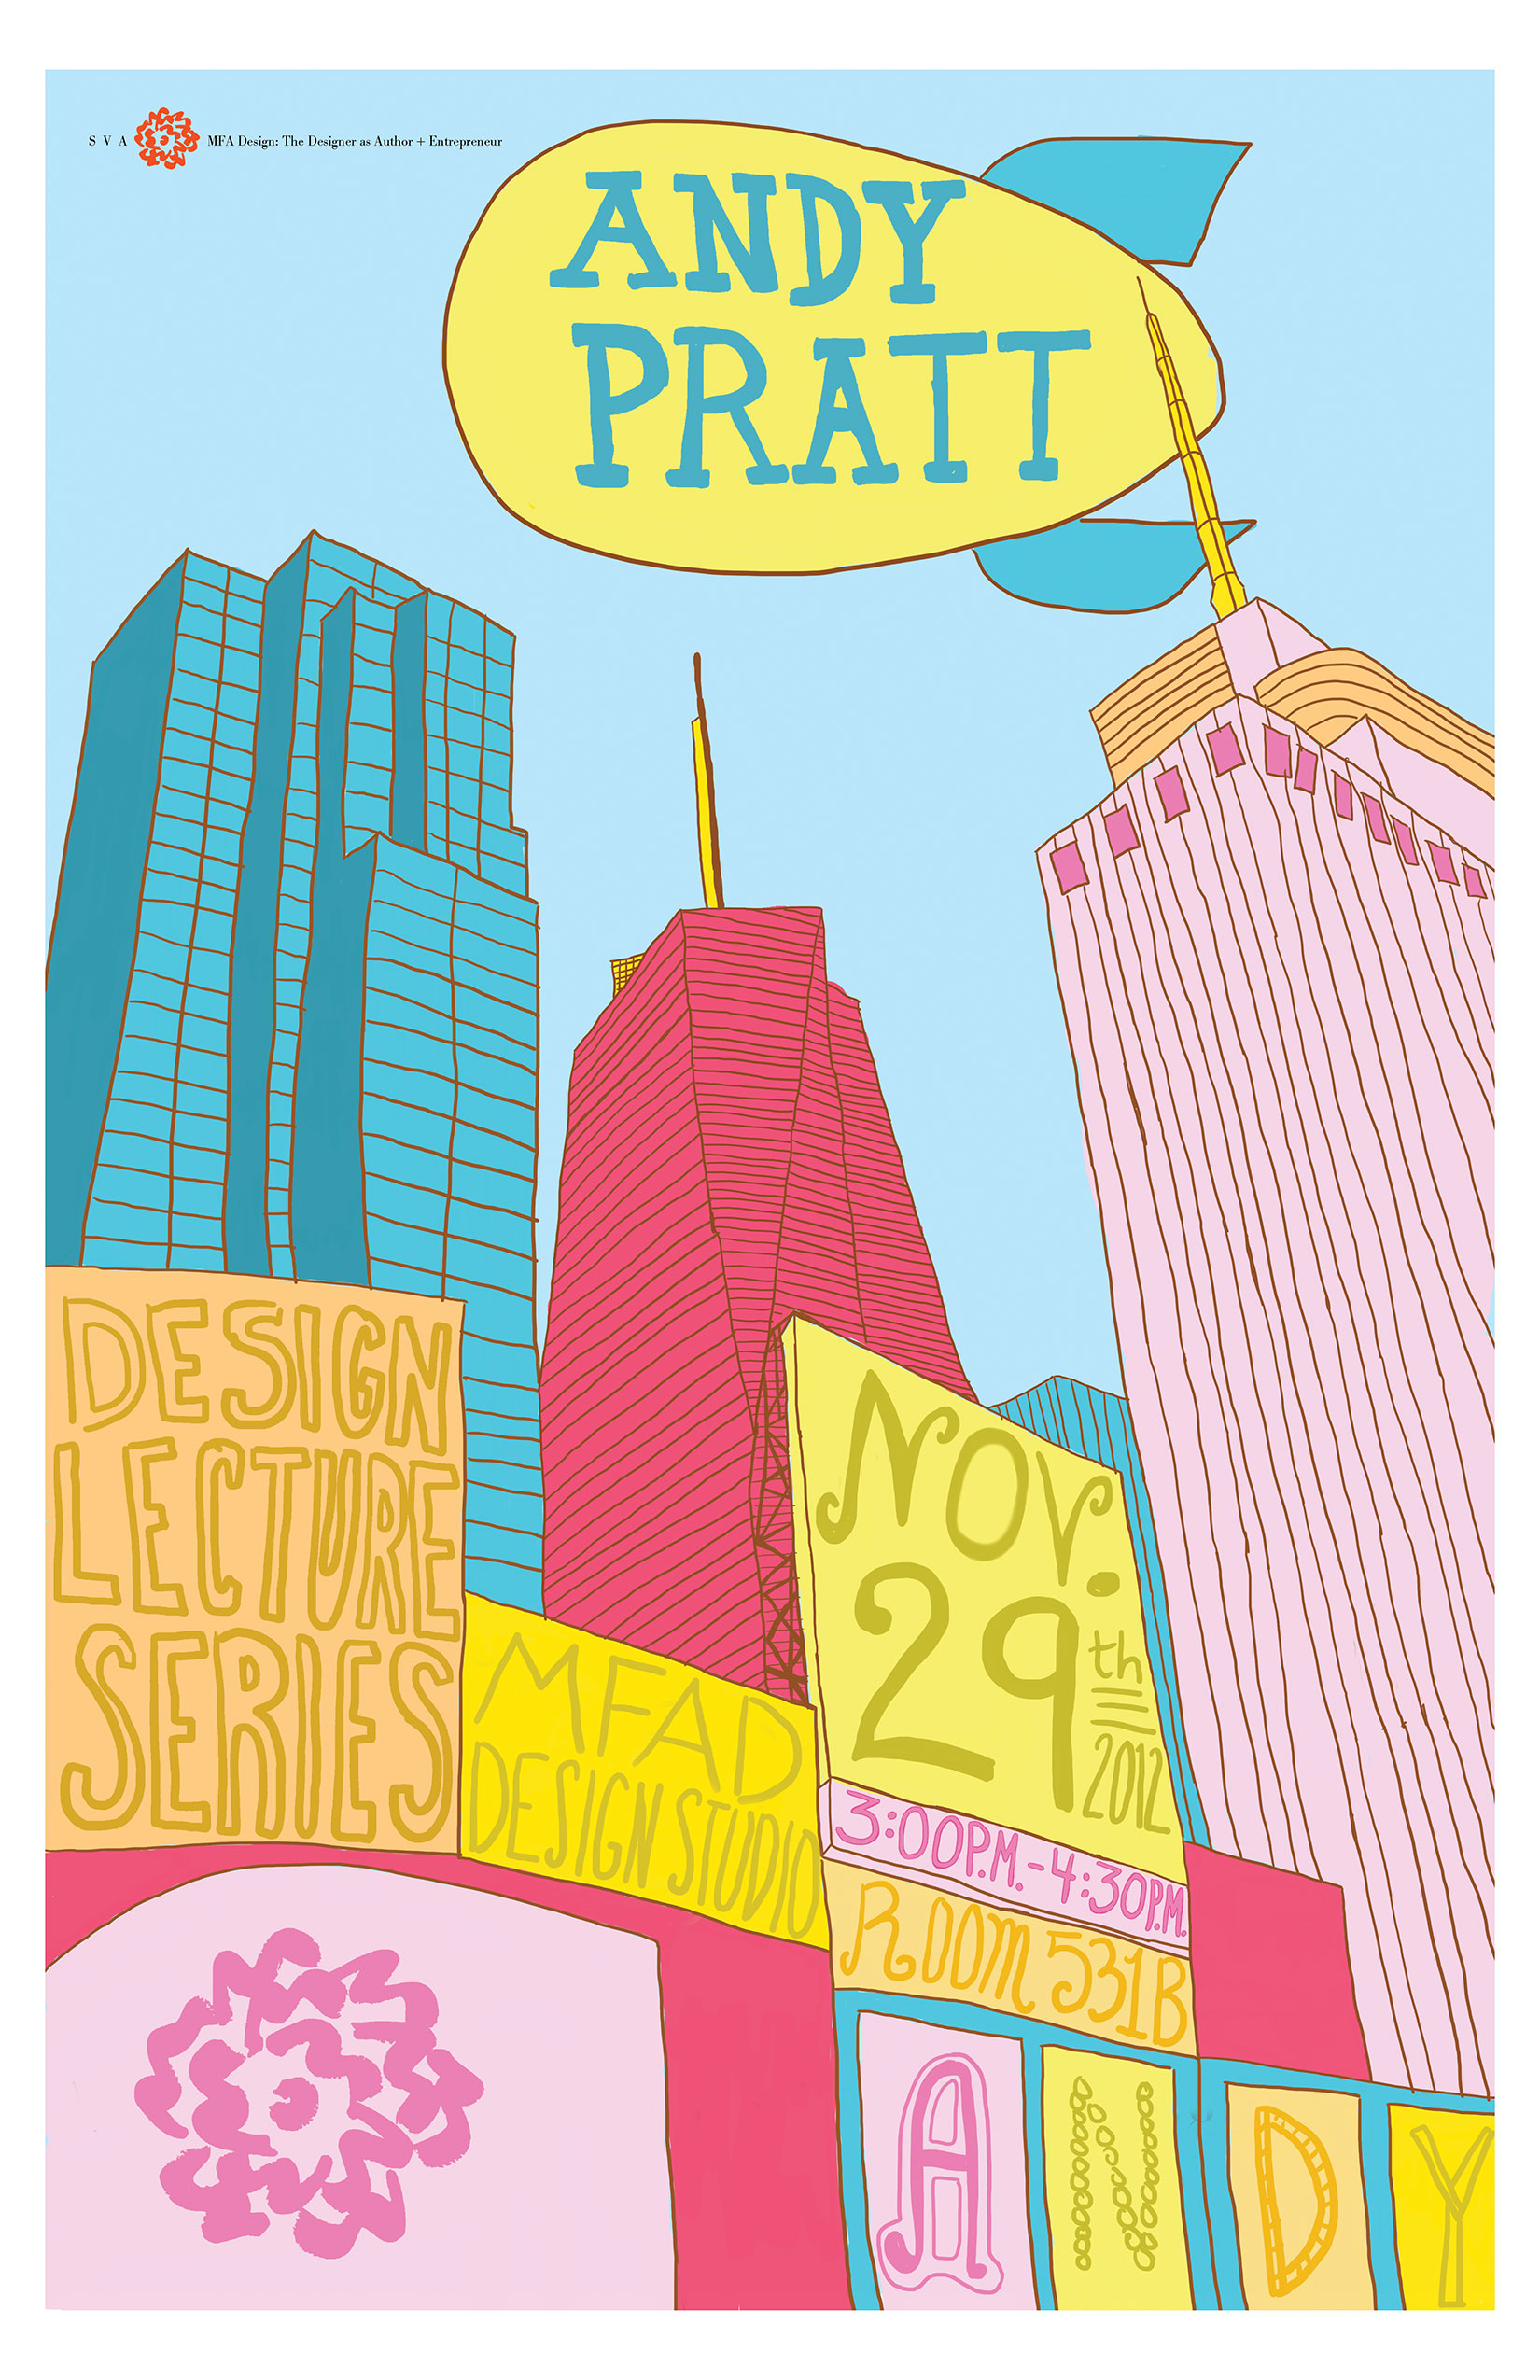 A colorful drawing of the New York City landscape with skyscrapers and some advertising on them. The advertising text says: Design Lecture Series. MFA Design Studio.